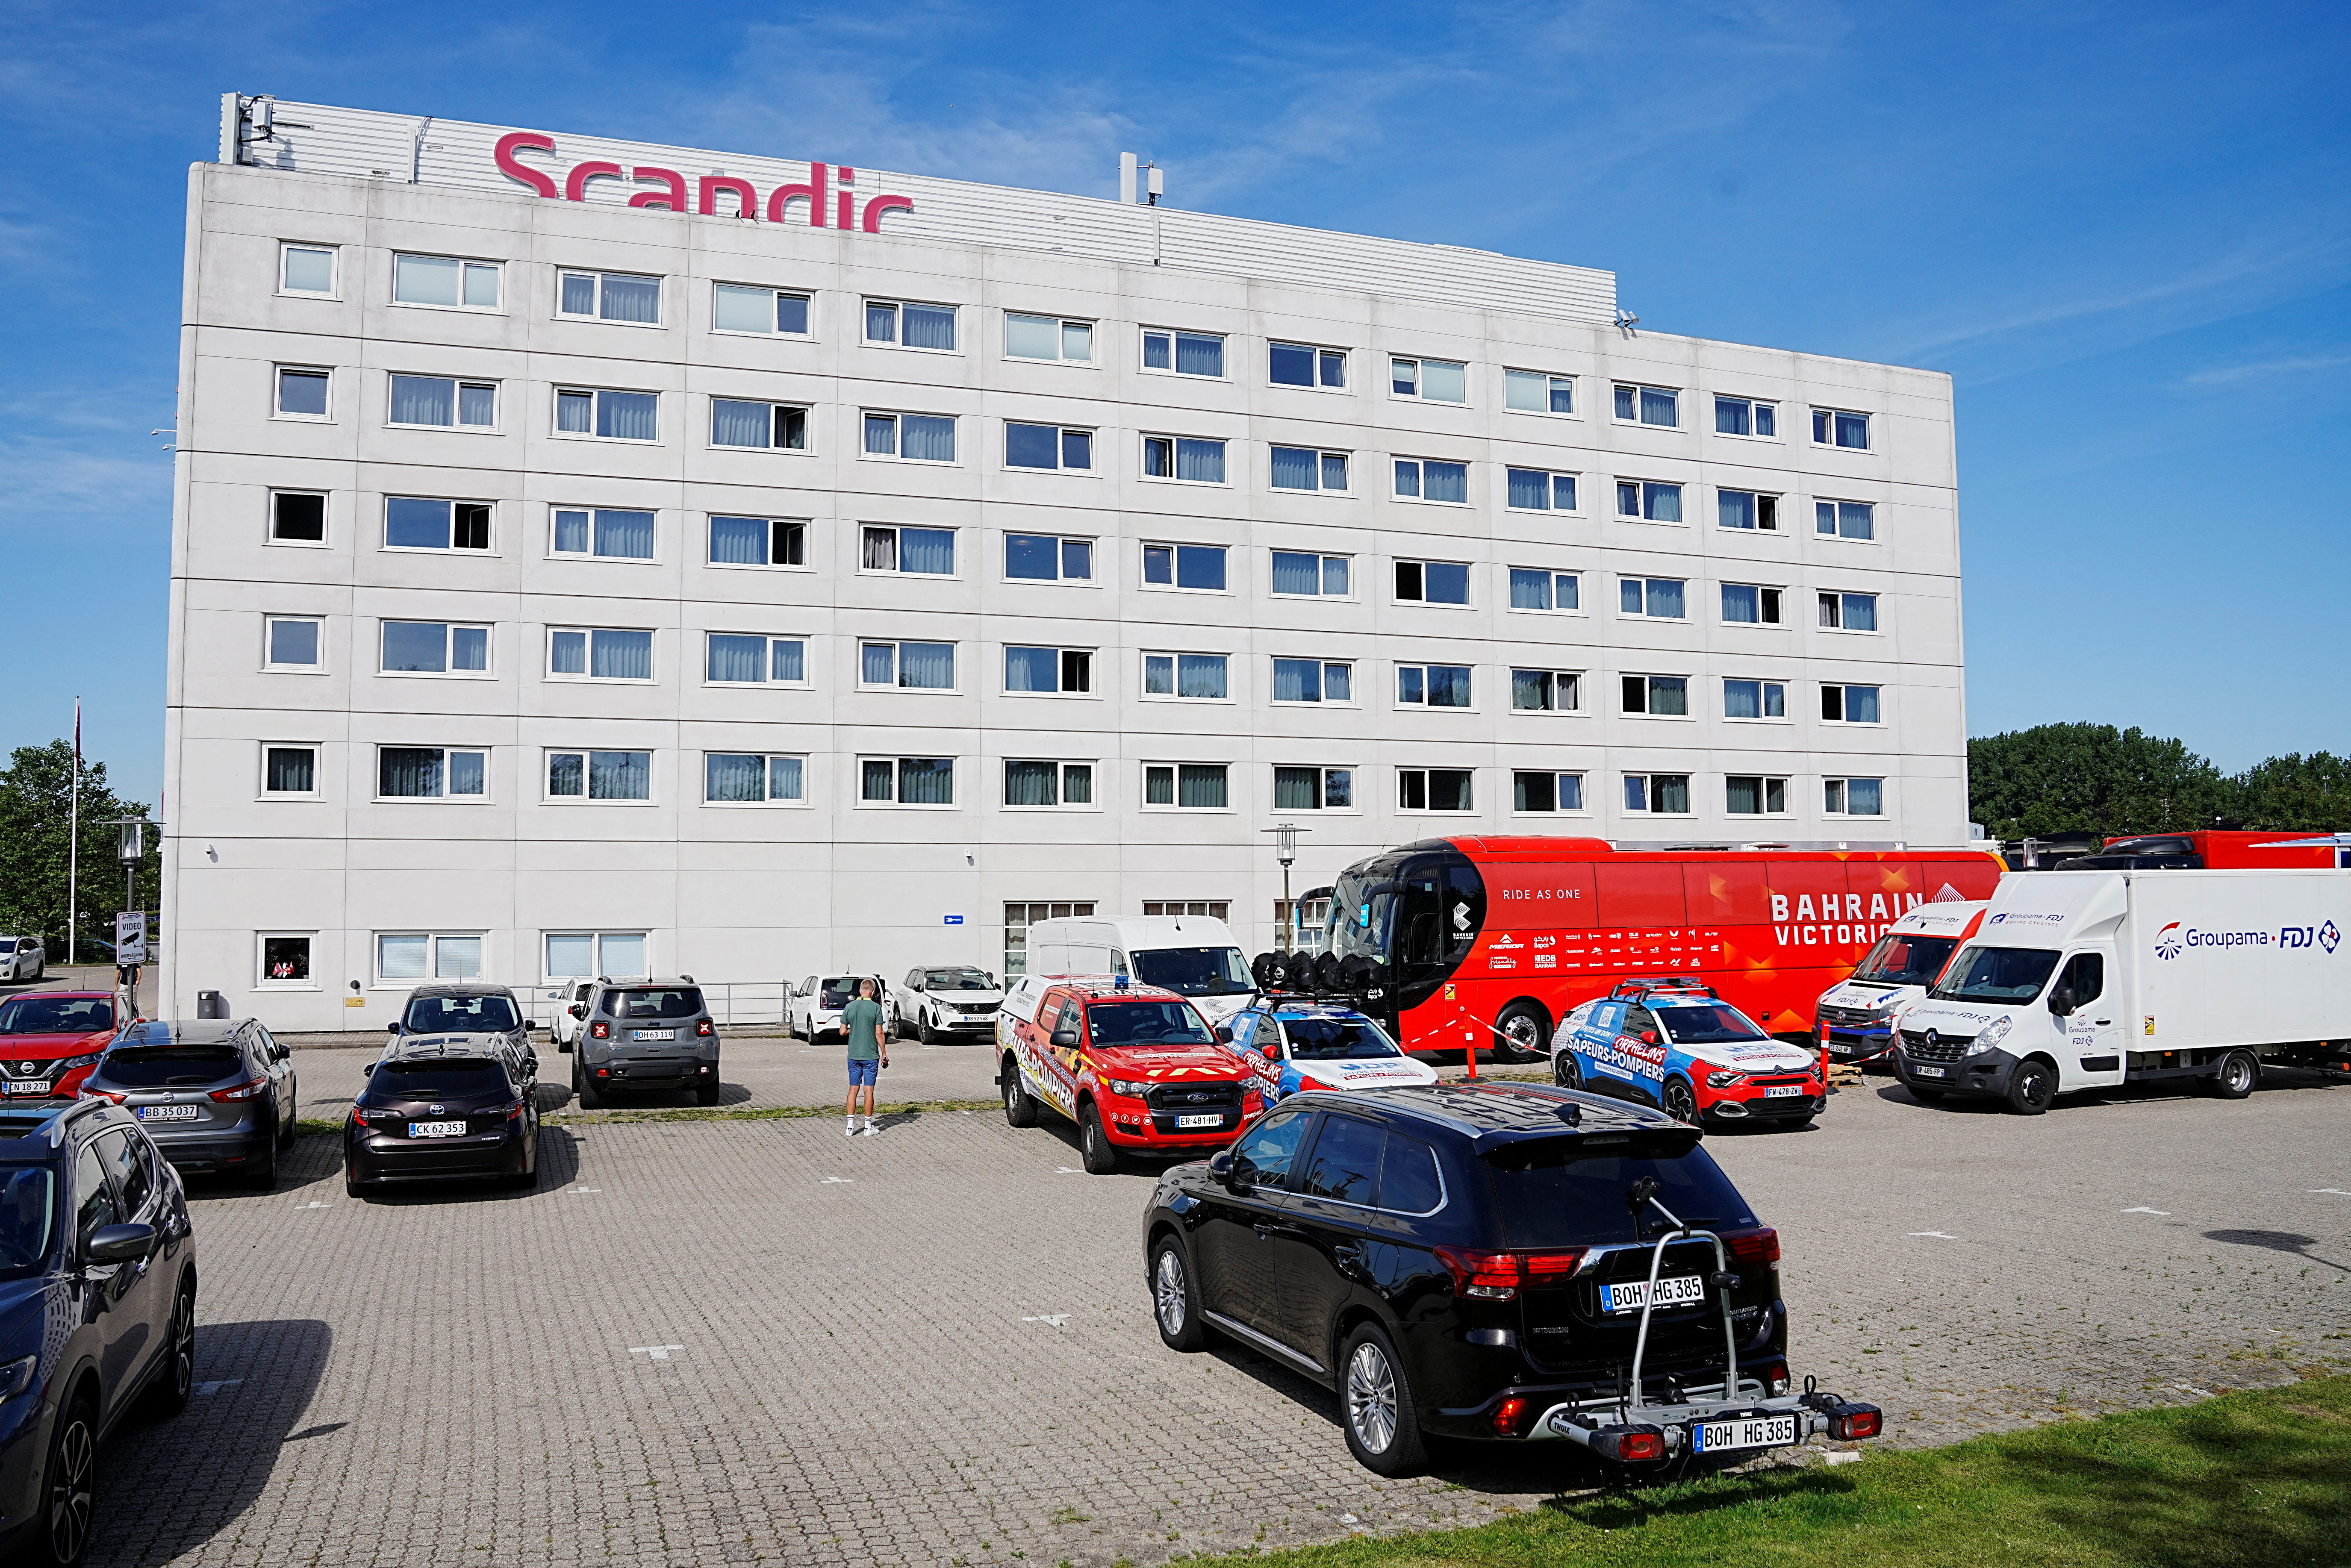 Team Bahrain Victorious' bus stands in front of Scandic Glostrup hotel, in Glostrup